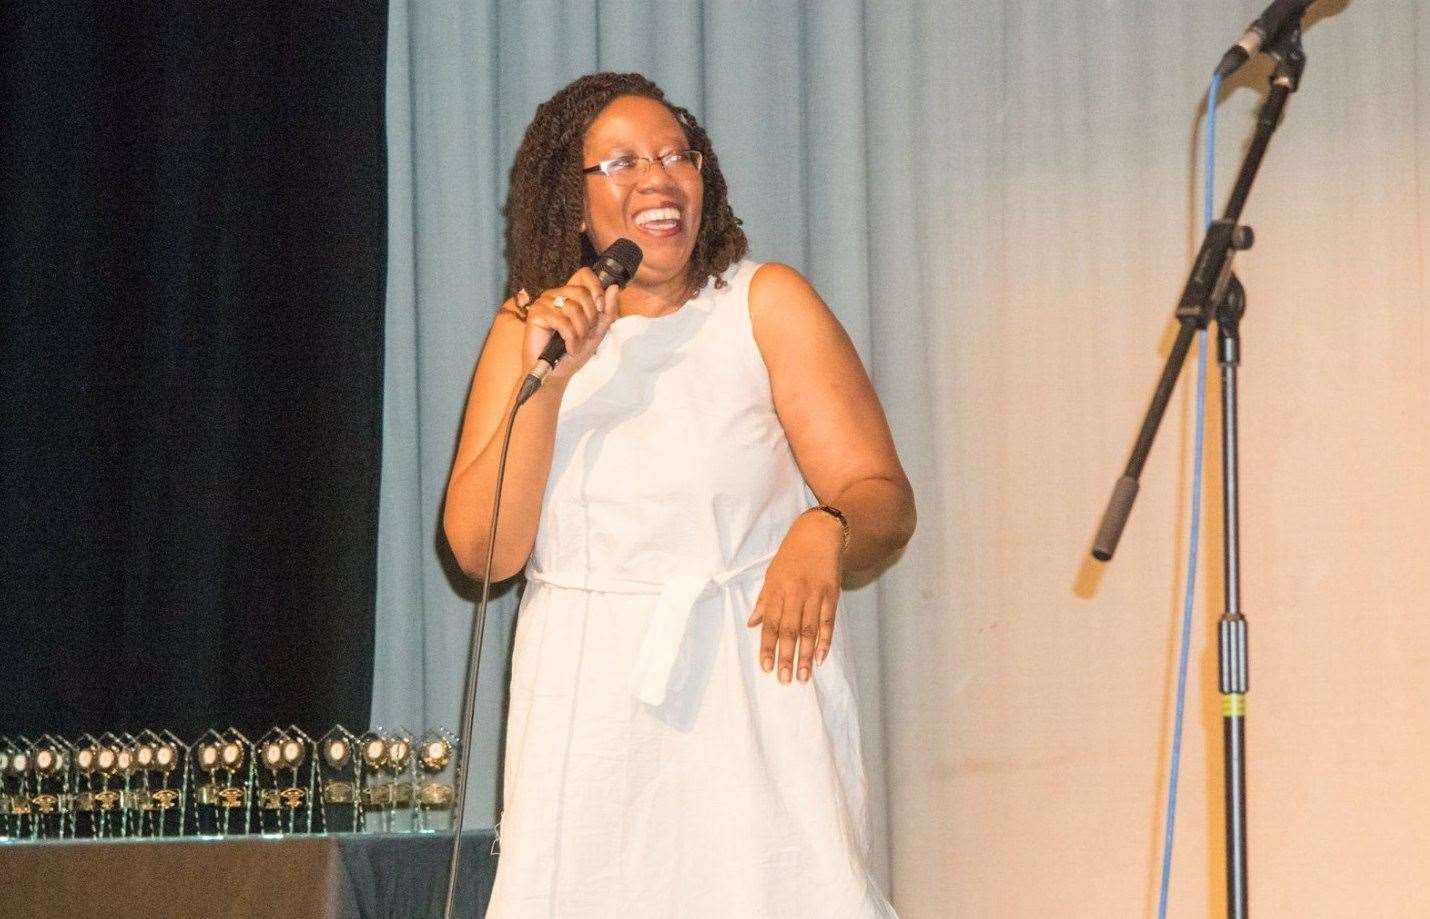 Carol presenting the Sankofa Young Black Achievers Awards in 2017